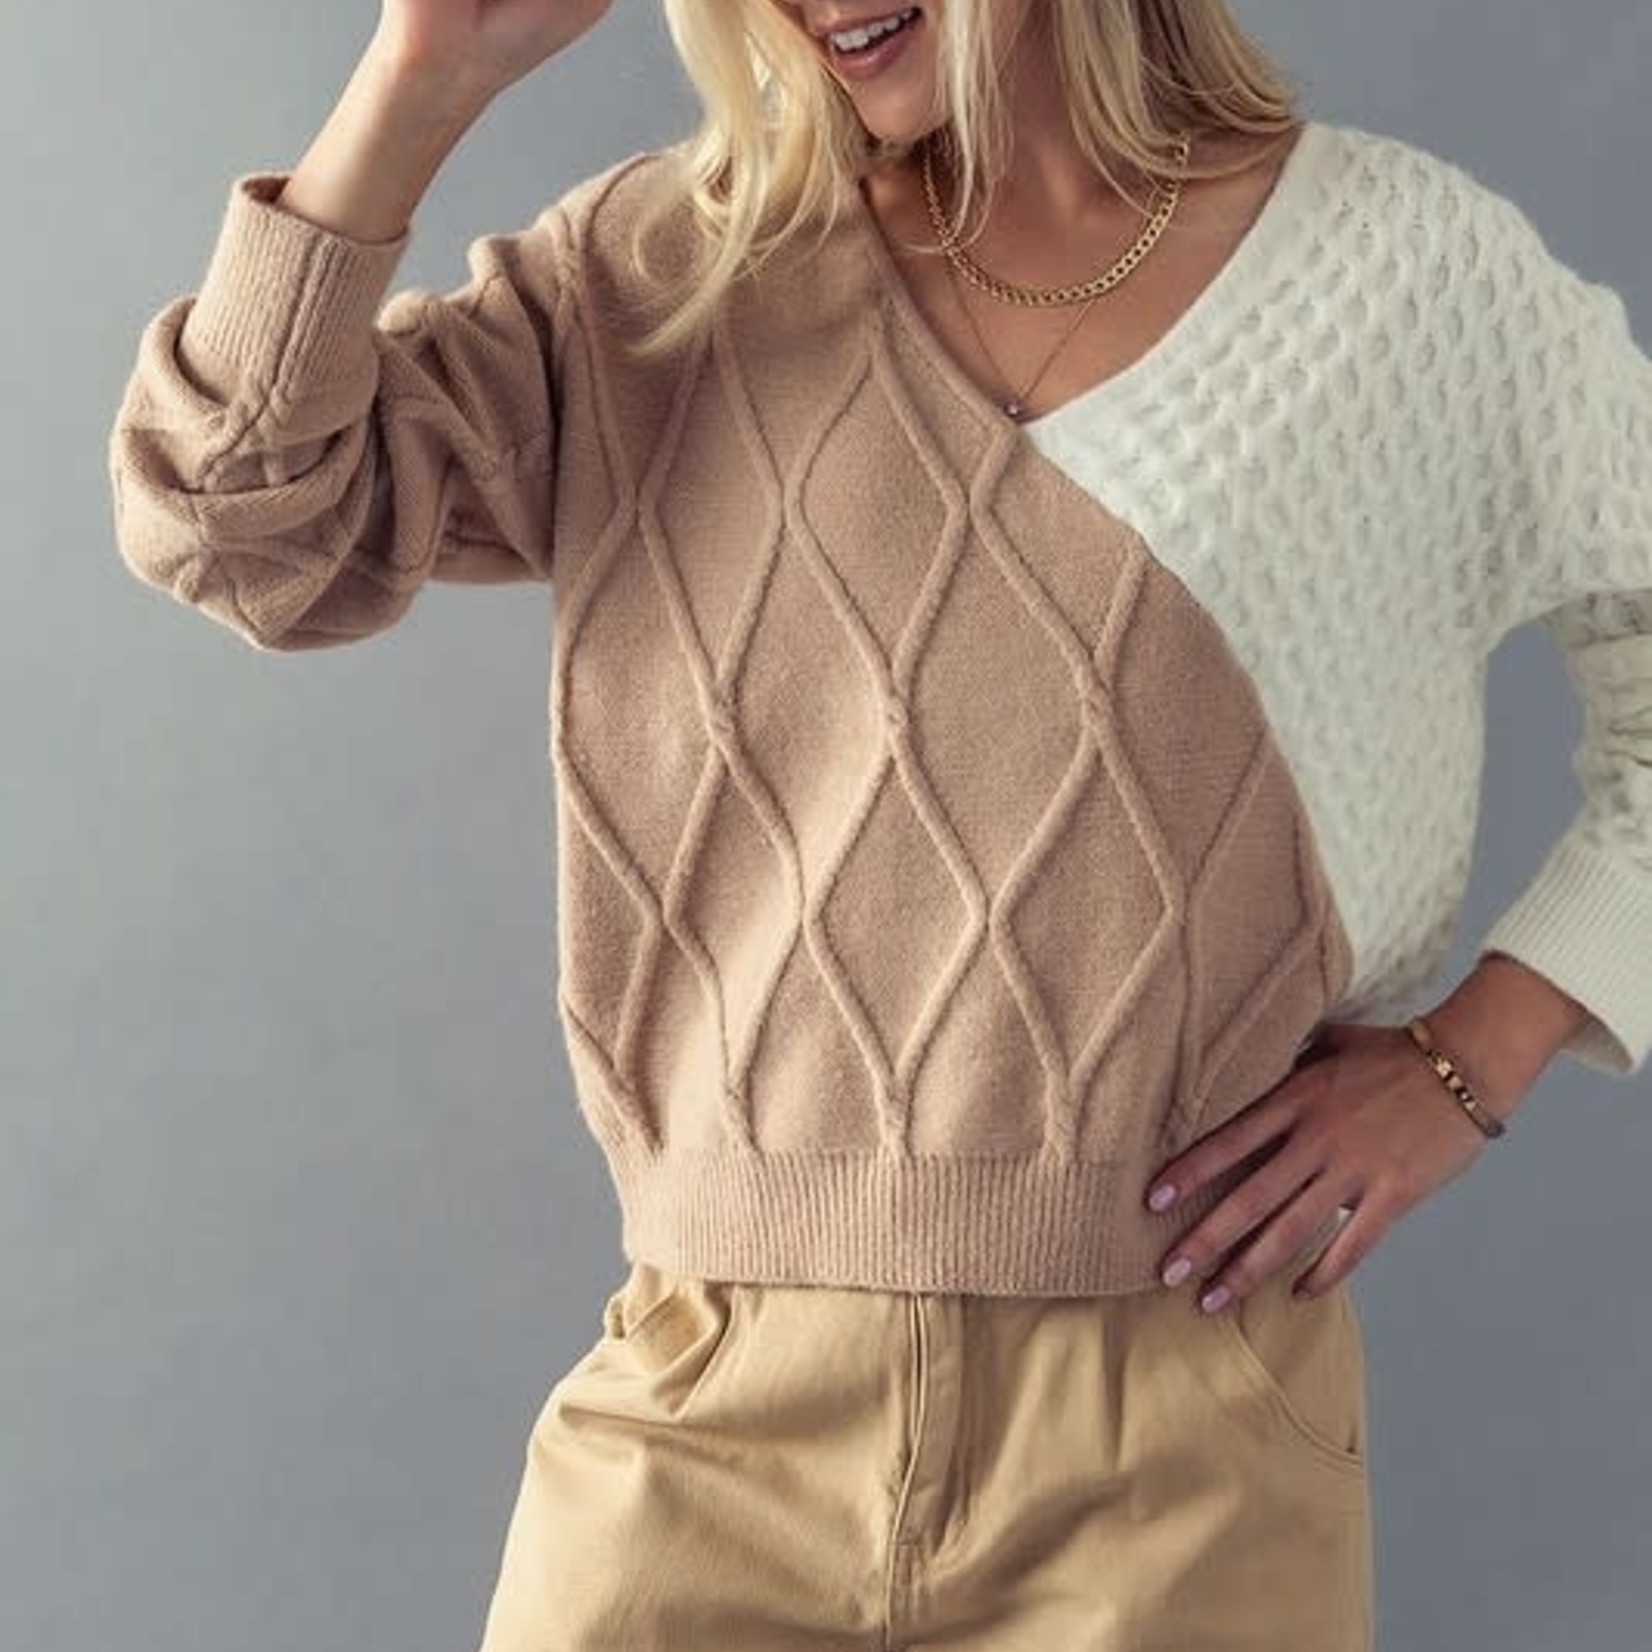 Urban Daizy Paige Quilted Twist Back Sweater